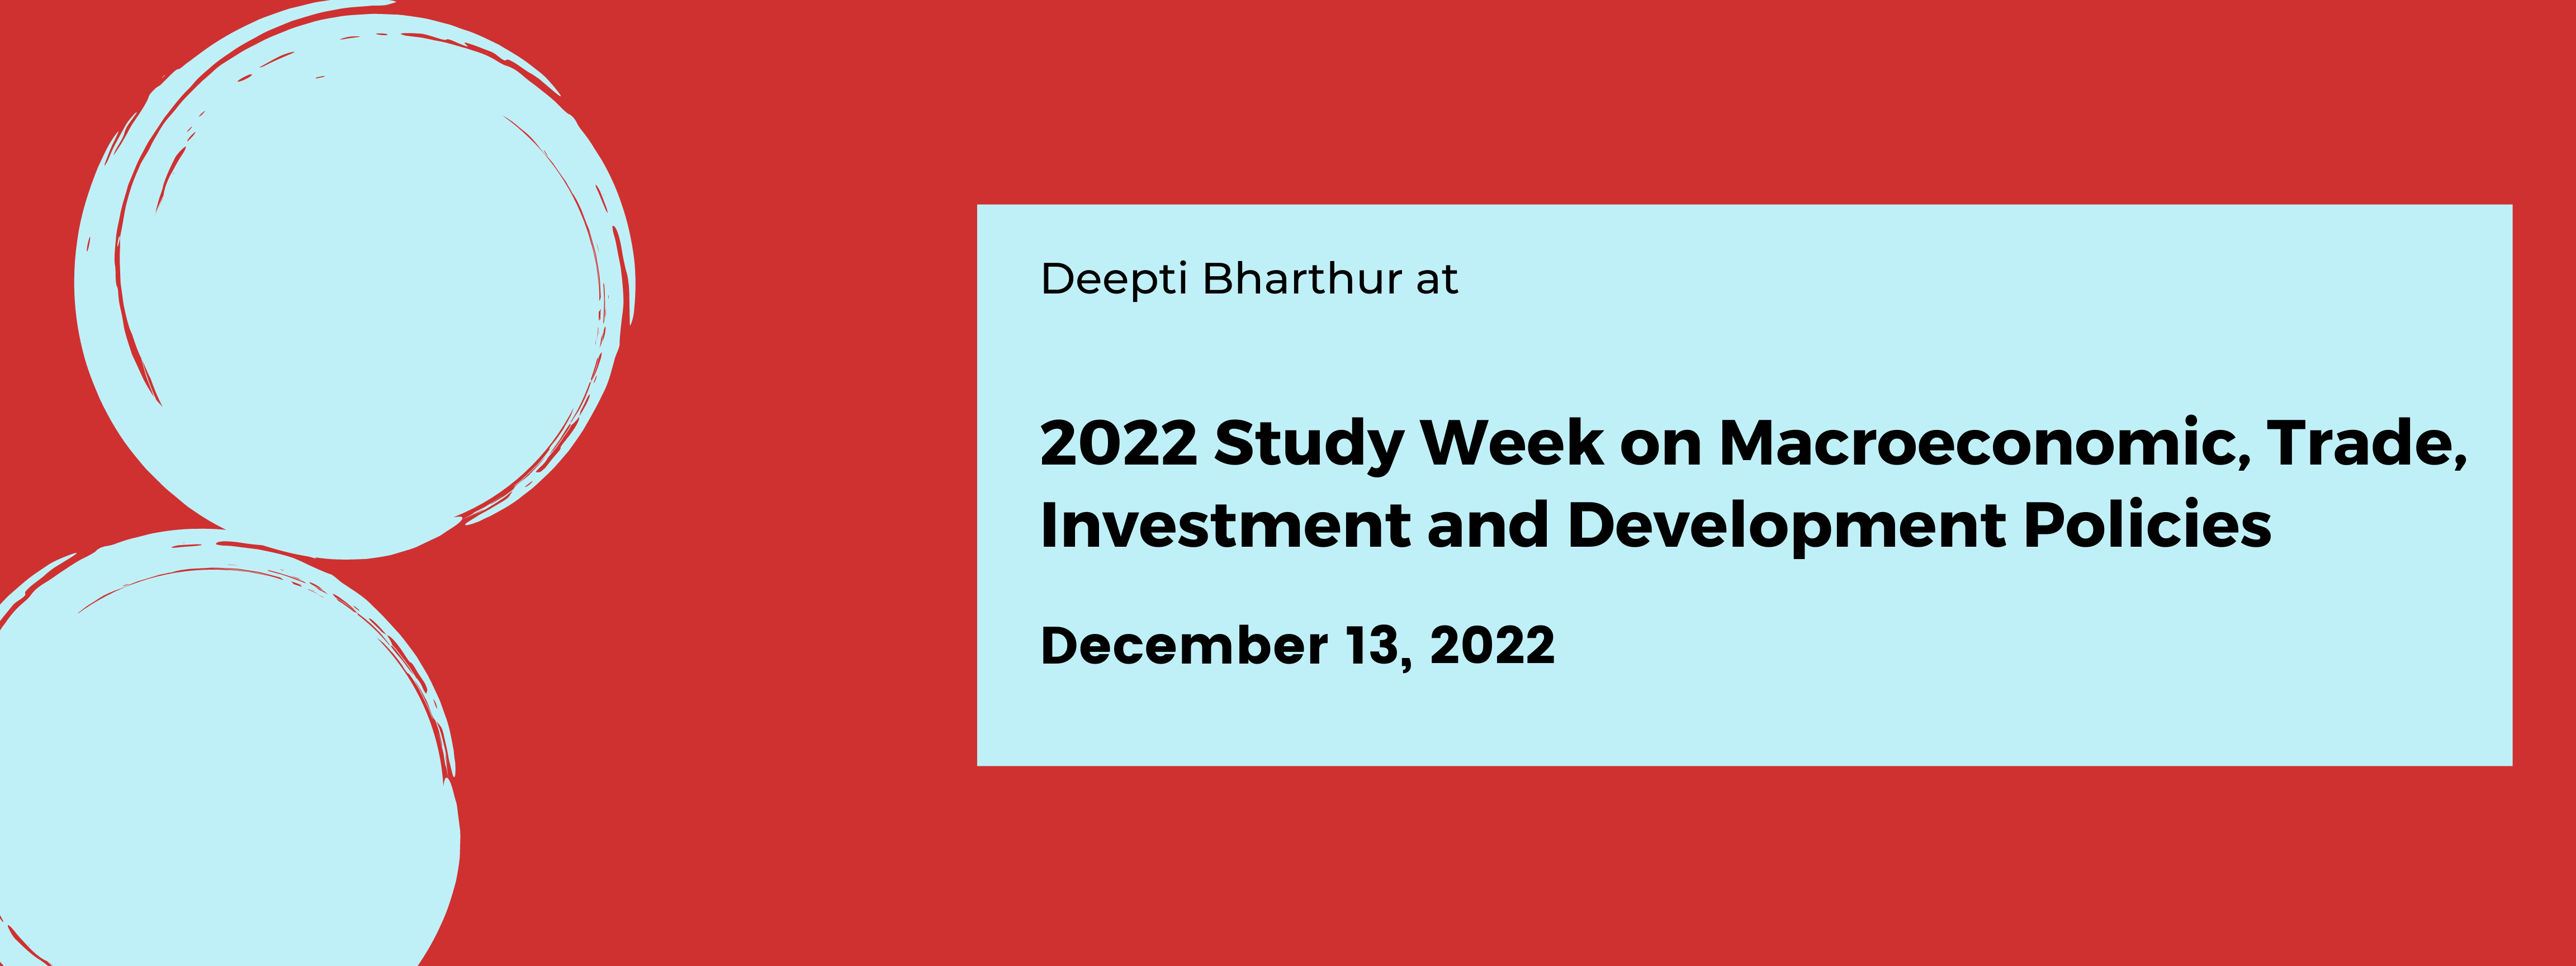 2022 Study Week on Macroeconomic, Trade, Investment and Development Policies